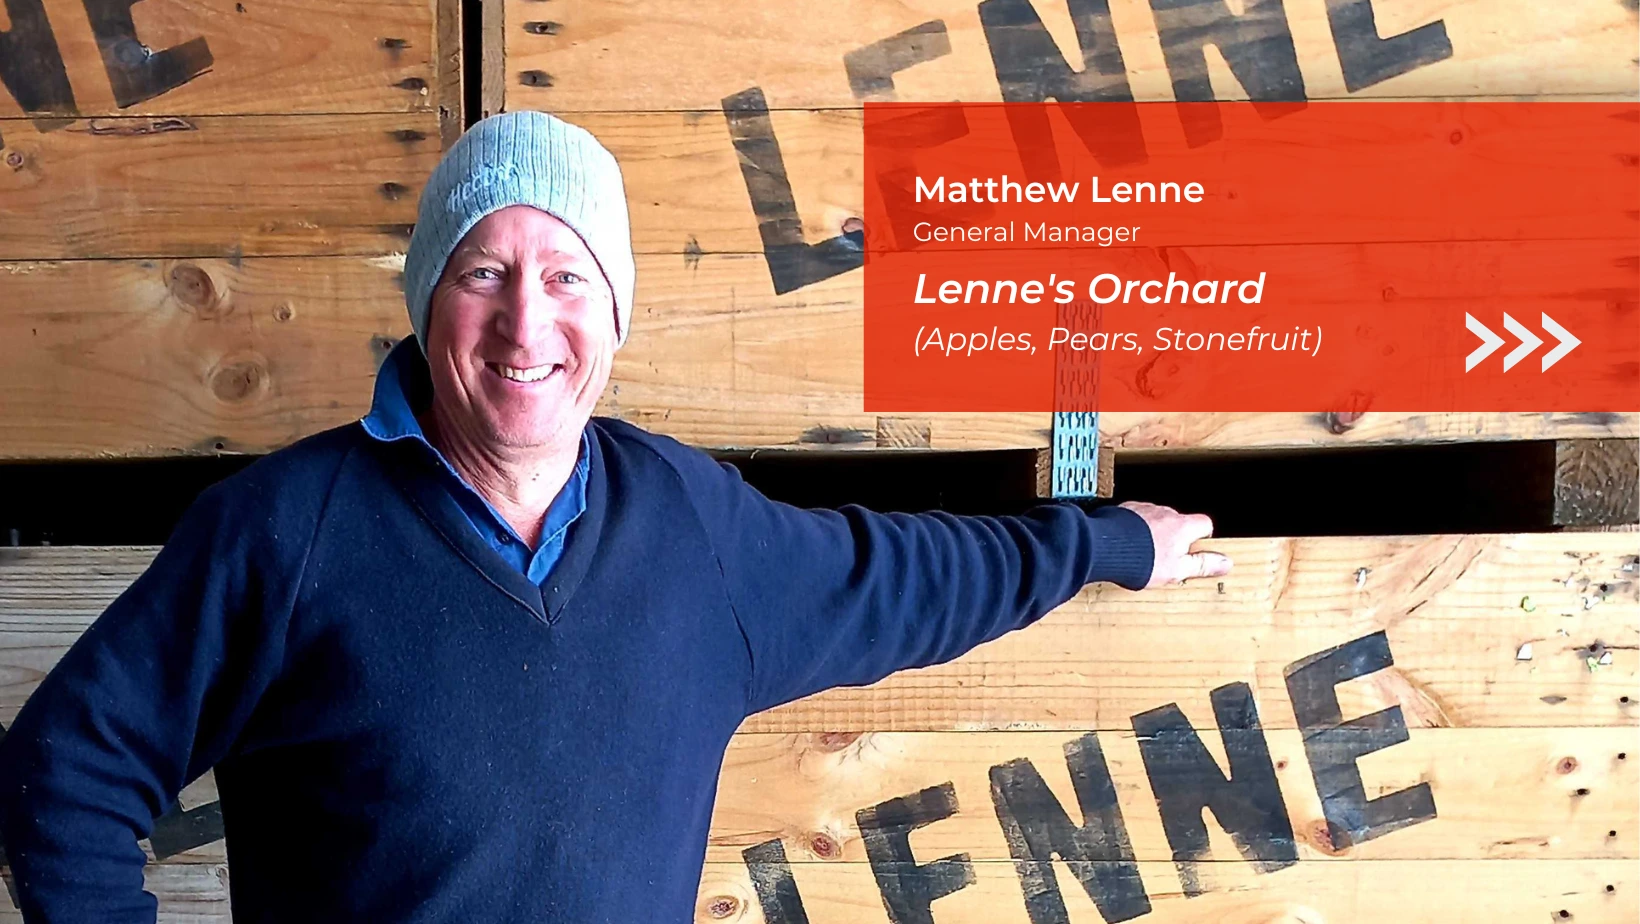 Matthew Lenne from Lenne's Orchard